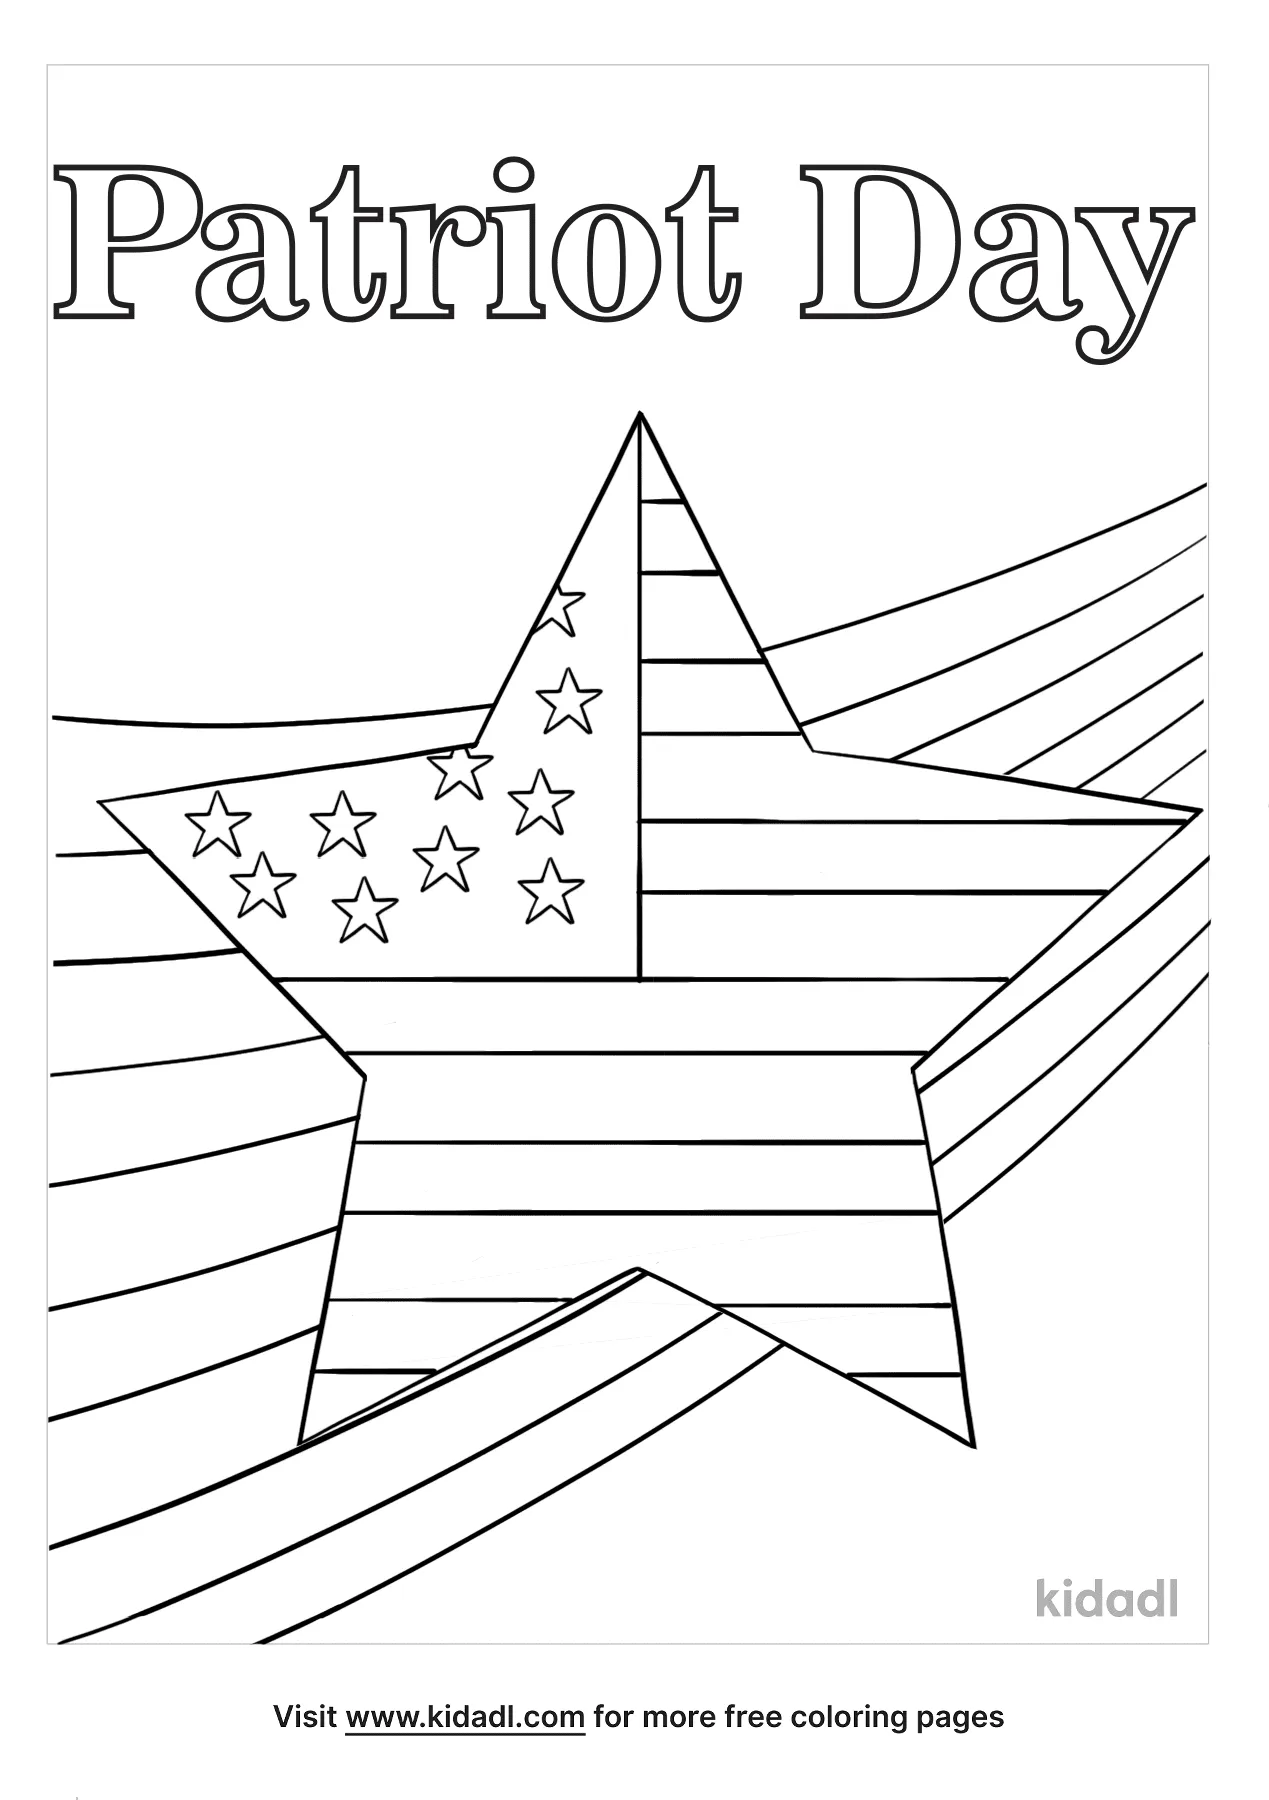 Free patriot day coloring page coloring page printables